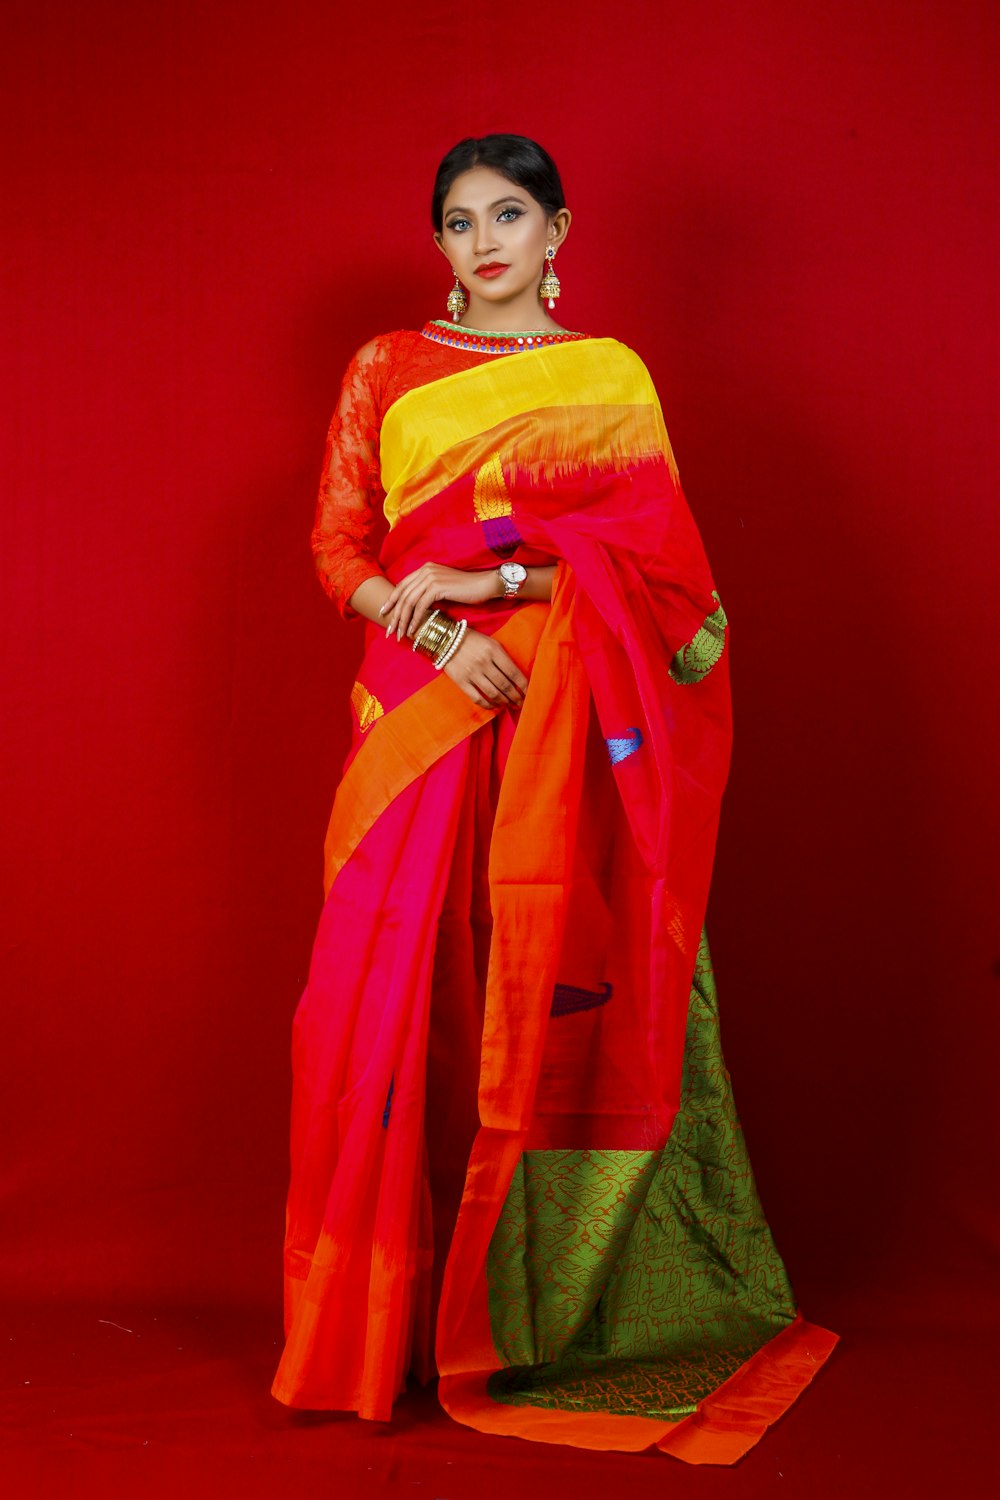 woman in red and green sari